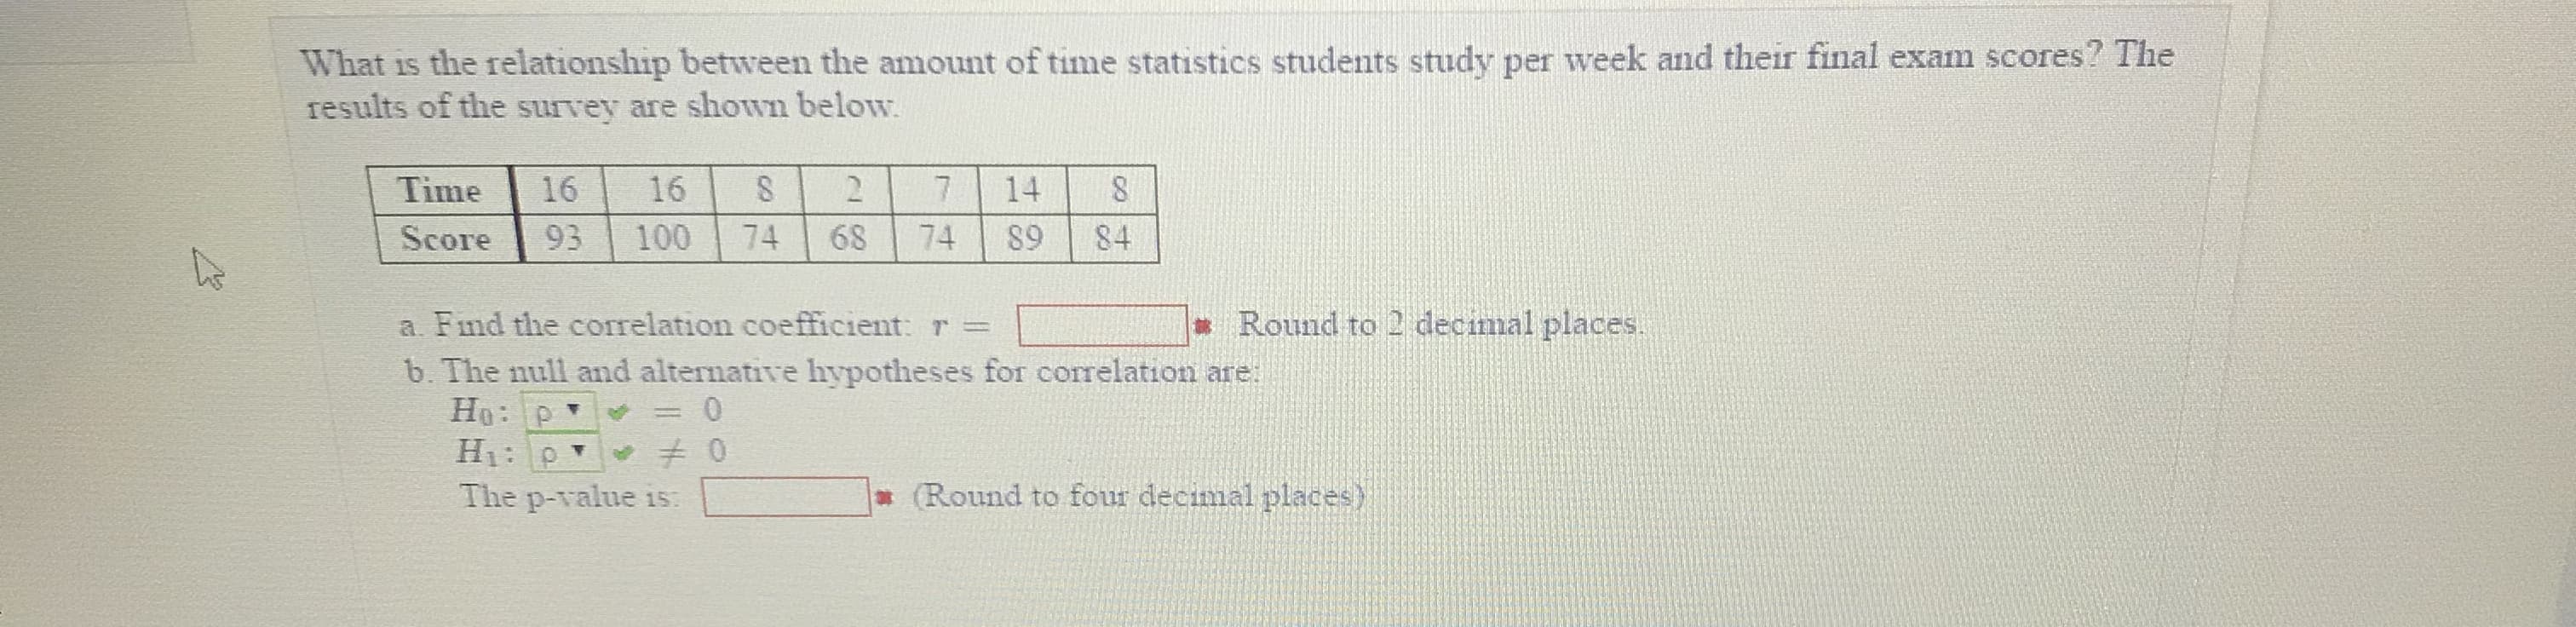 What is the relationship between the amount of time statistics students study per week and their final exam scores? The
results of the survey are shown below
Time 1616 27 14 8
Score 93 100 74 68 74 S9 84
Round to 2 decimal places
a. Find the correlation coefficient r =
b. The null and alternative hypotheses for corelation are:
The p-value is
Round to four decimal places)
